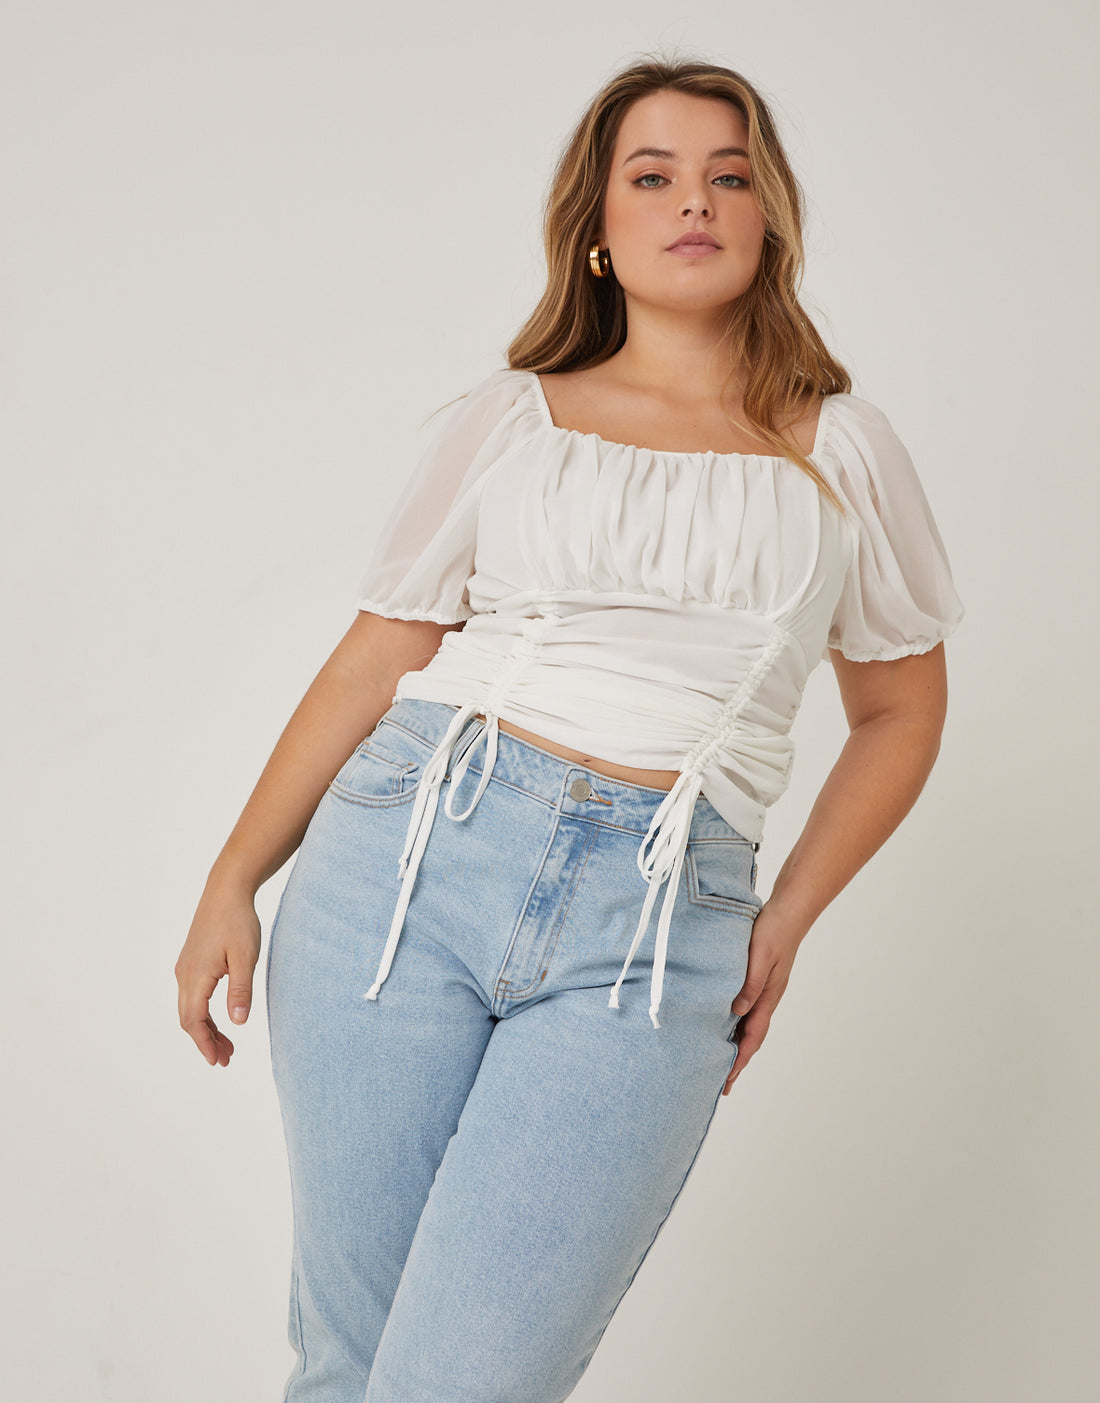 Curve Double Ruched Chiffon Top Plus Size Tops Off White 1XL -2020AVE